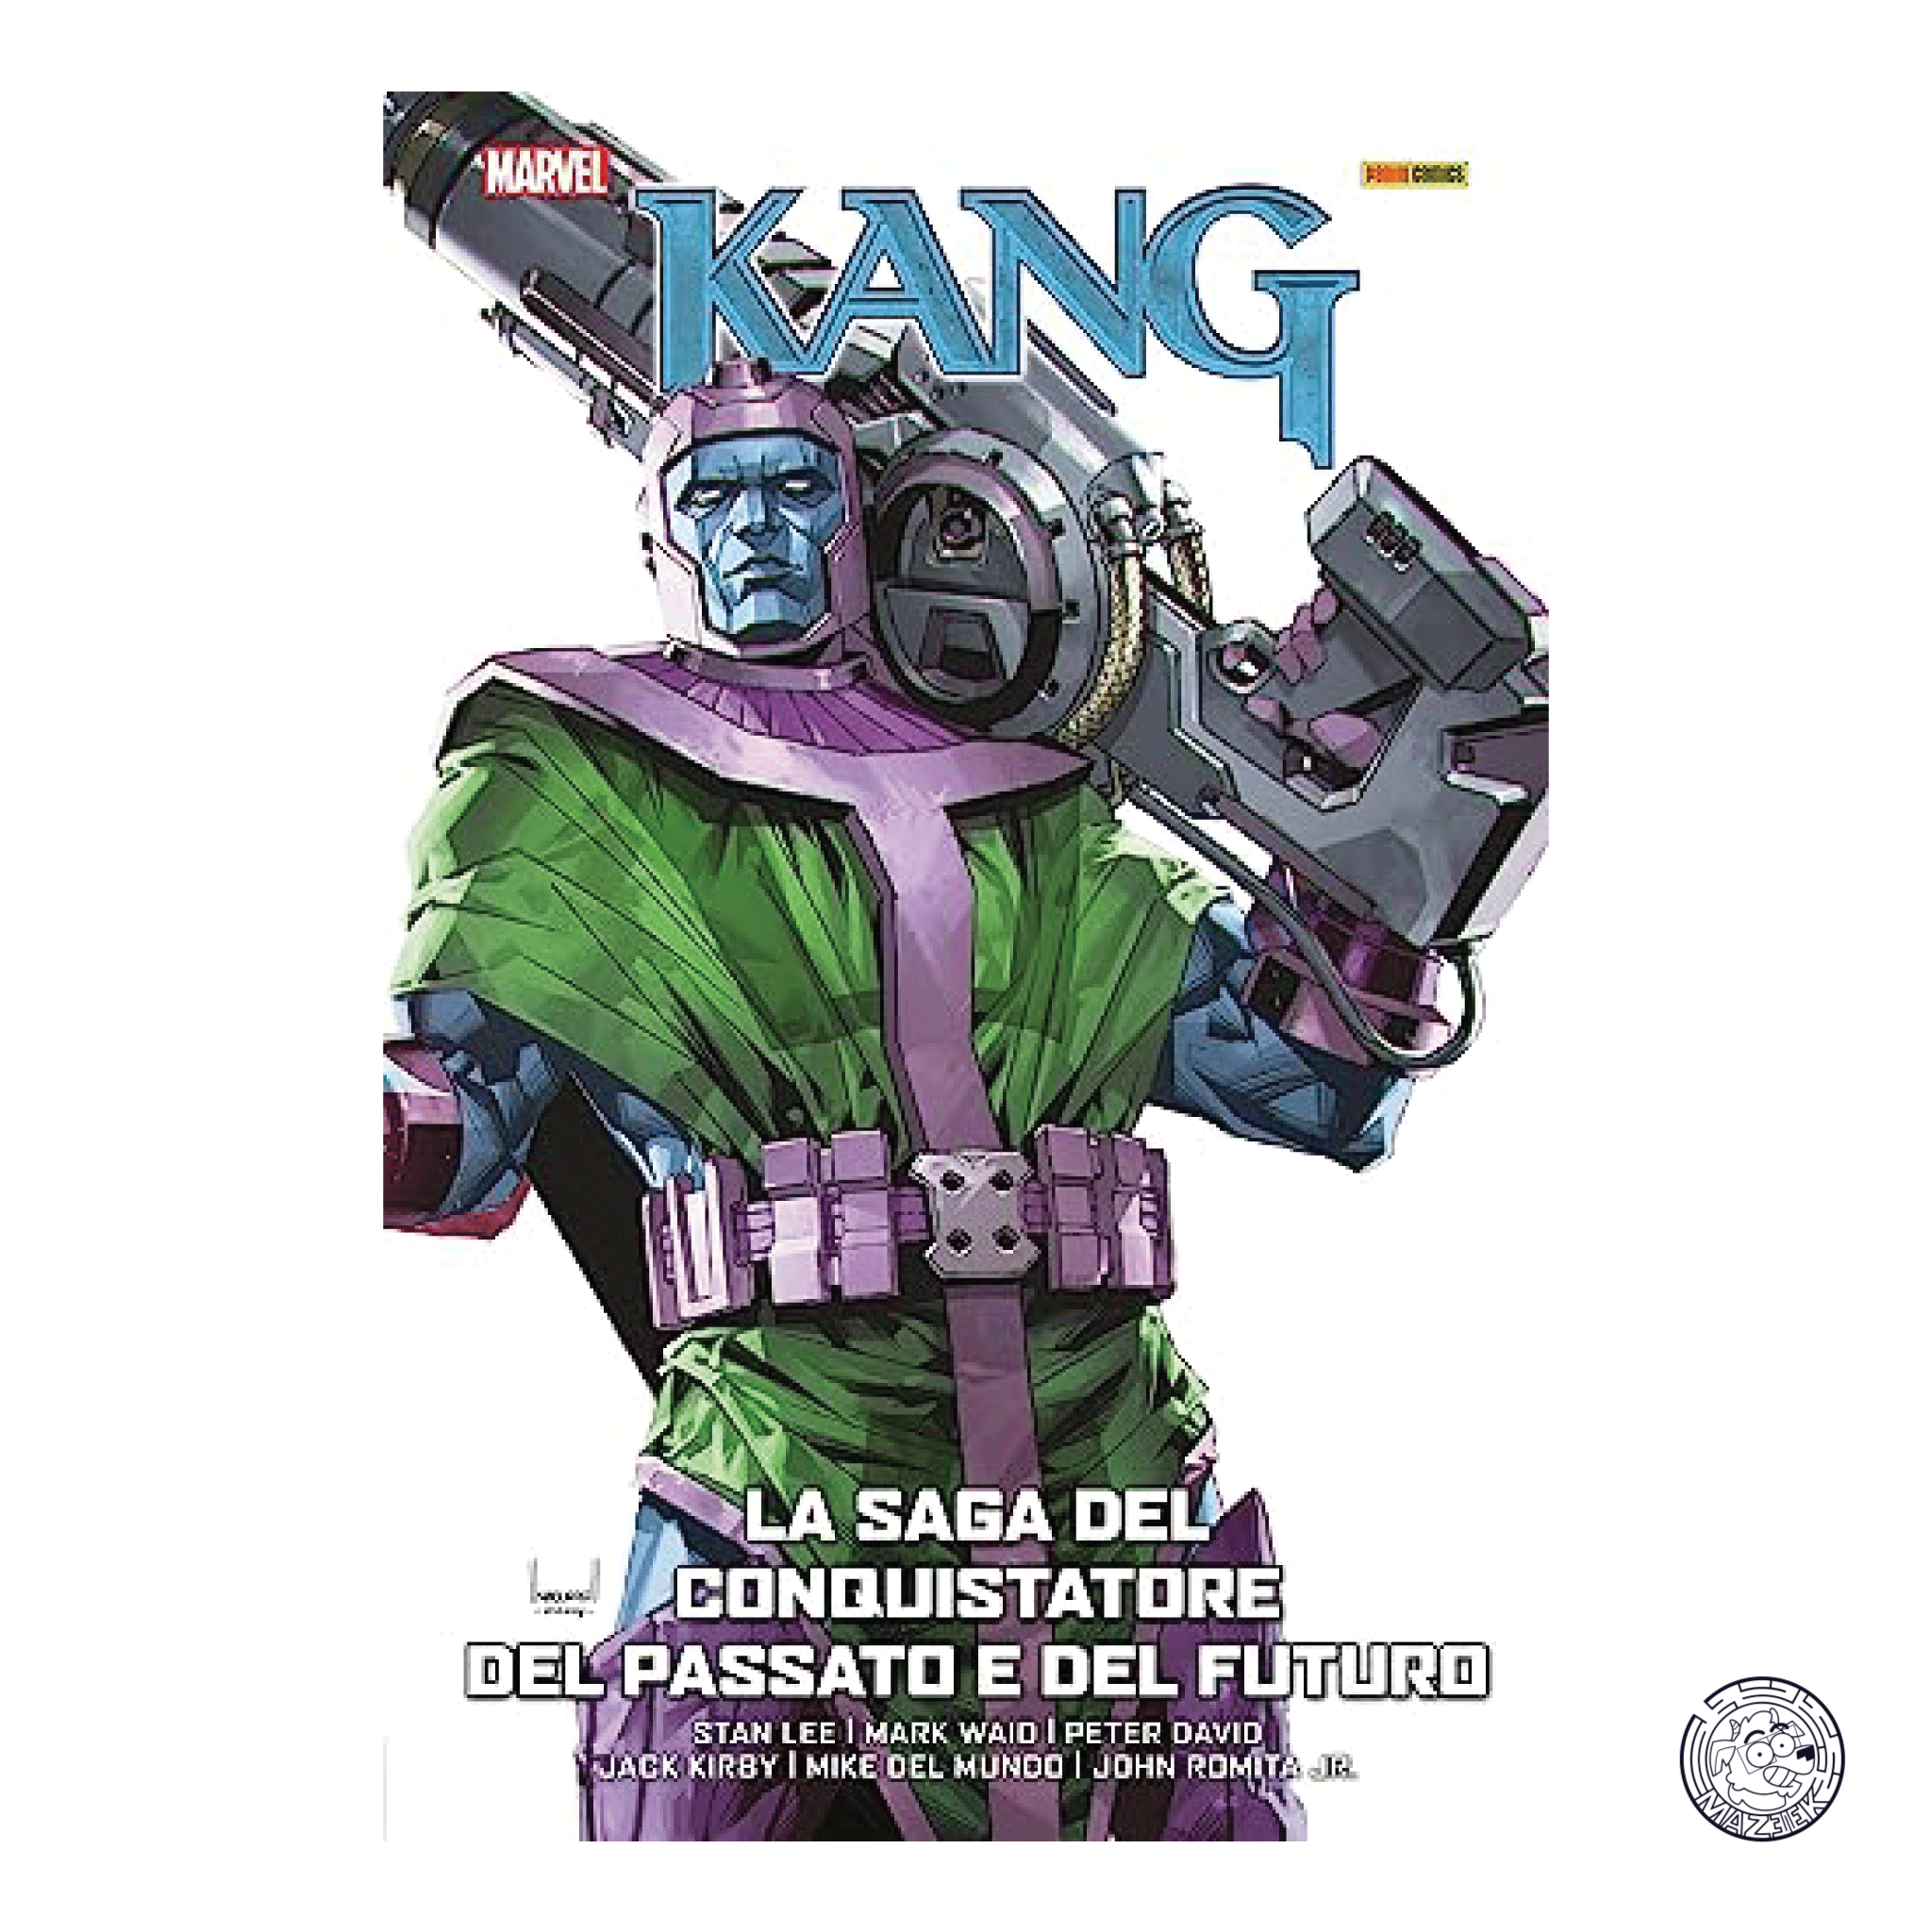 Kang: The Saga of the Conqueror of the Past and the Future